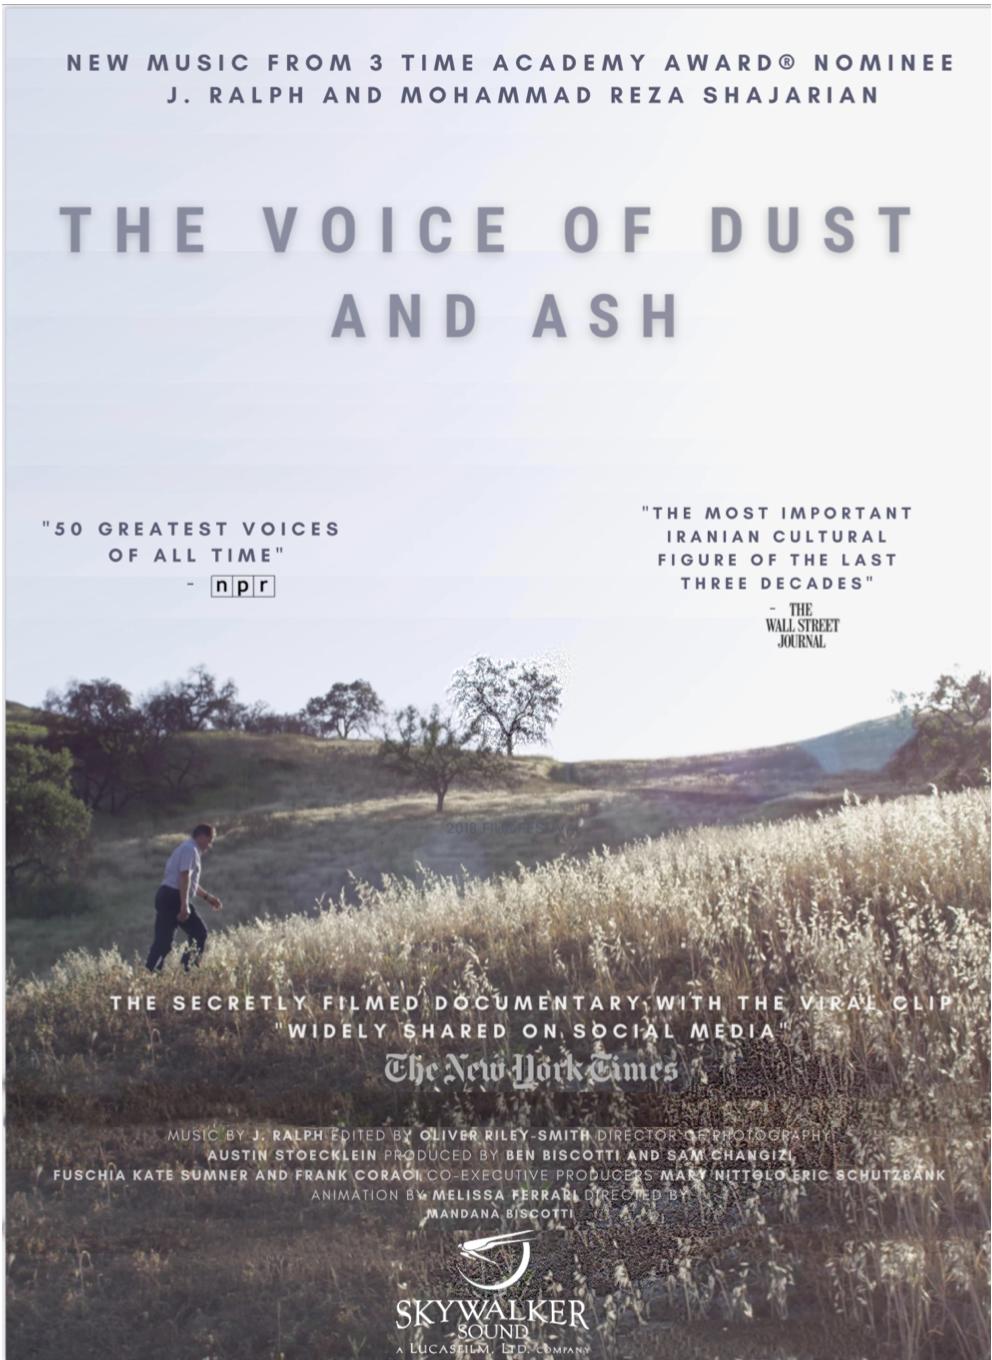 Filmposter von "The Voice of Dust and Ash" (Quelle: Matilda Film Productions)